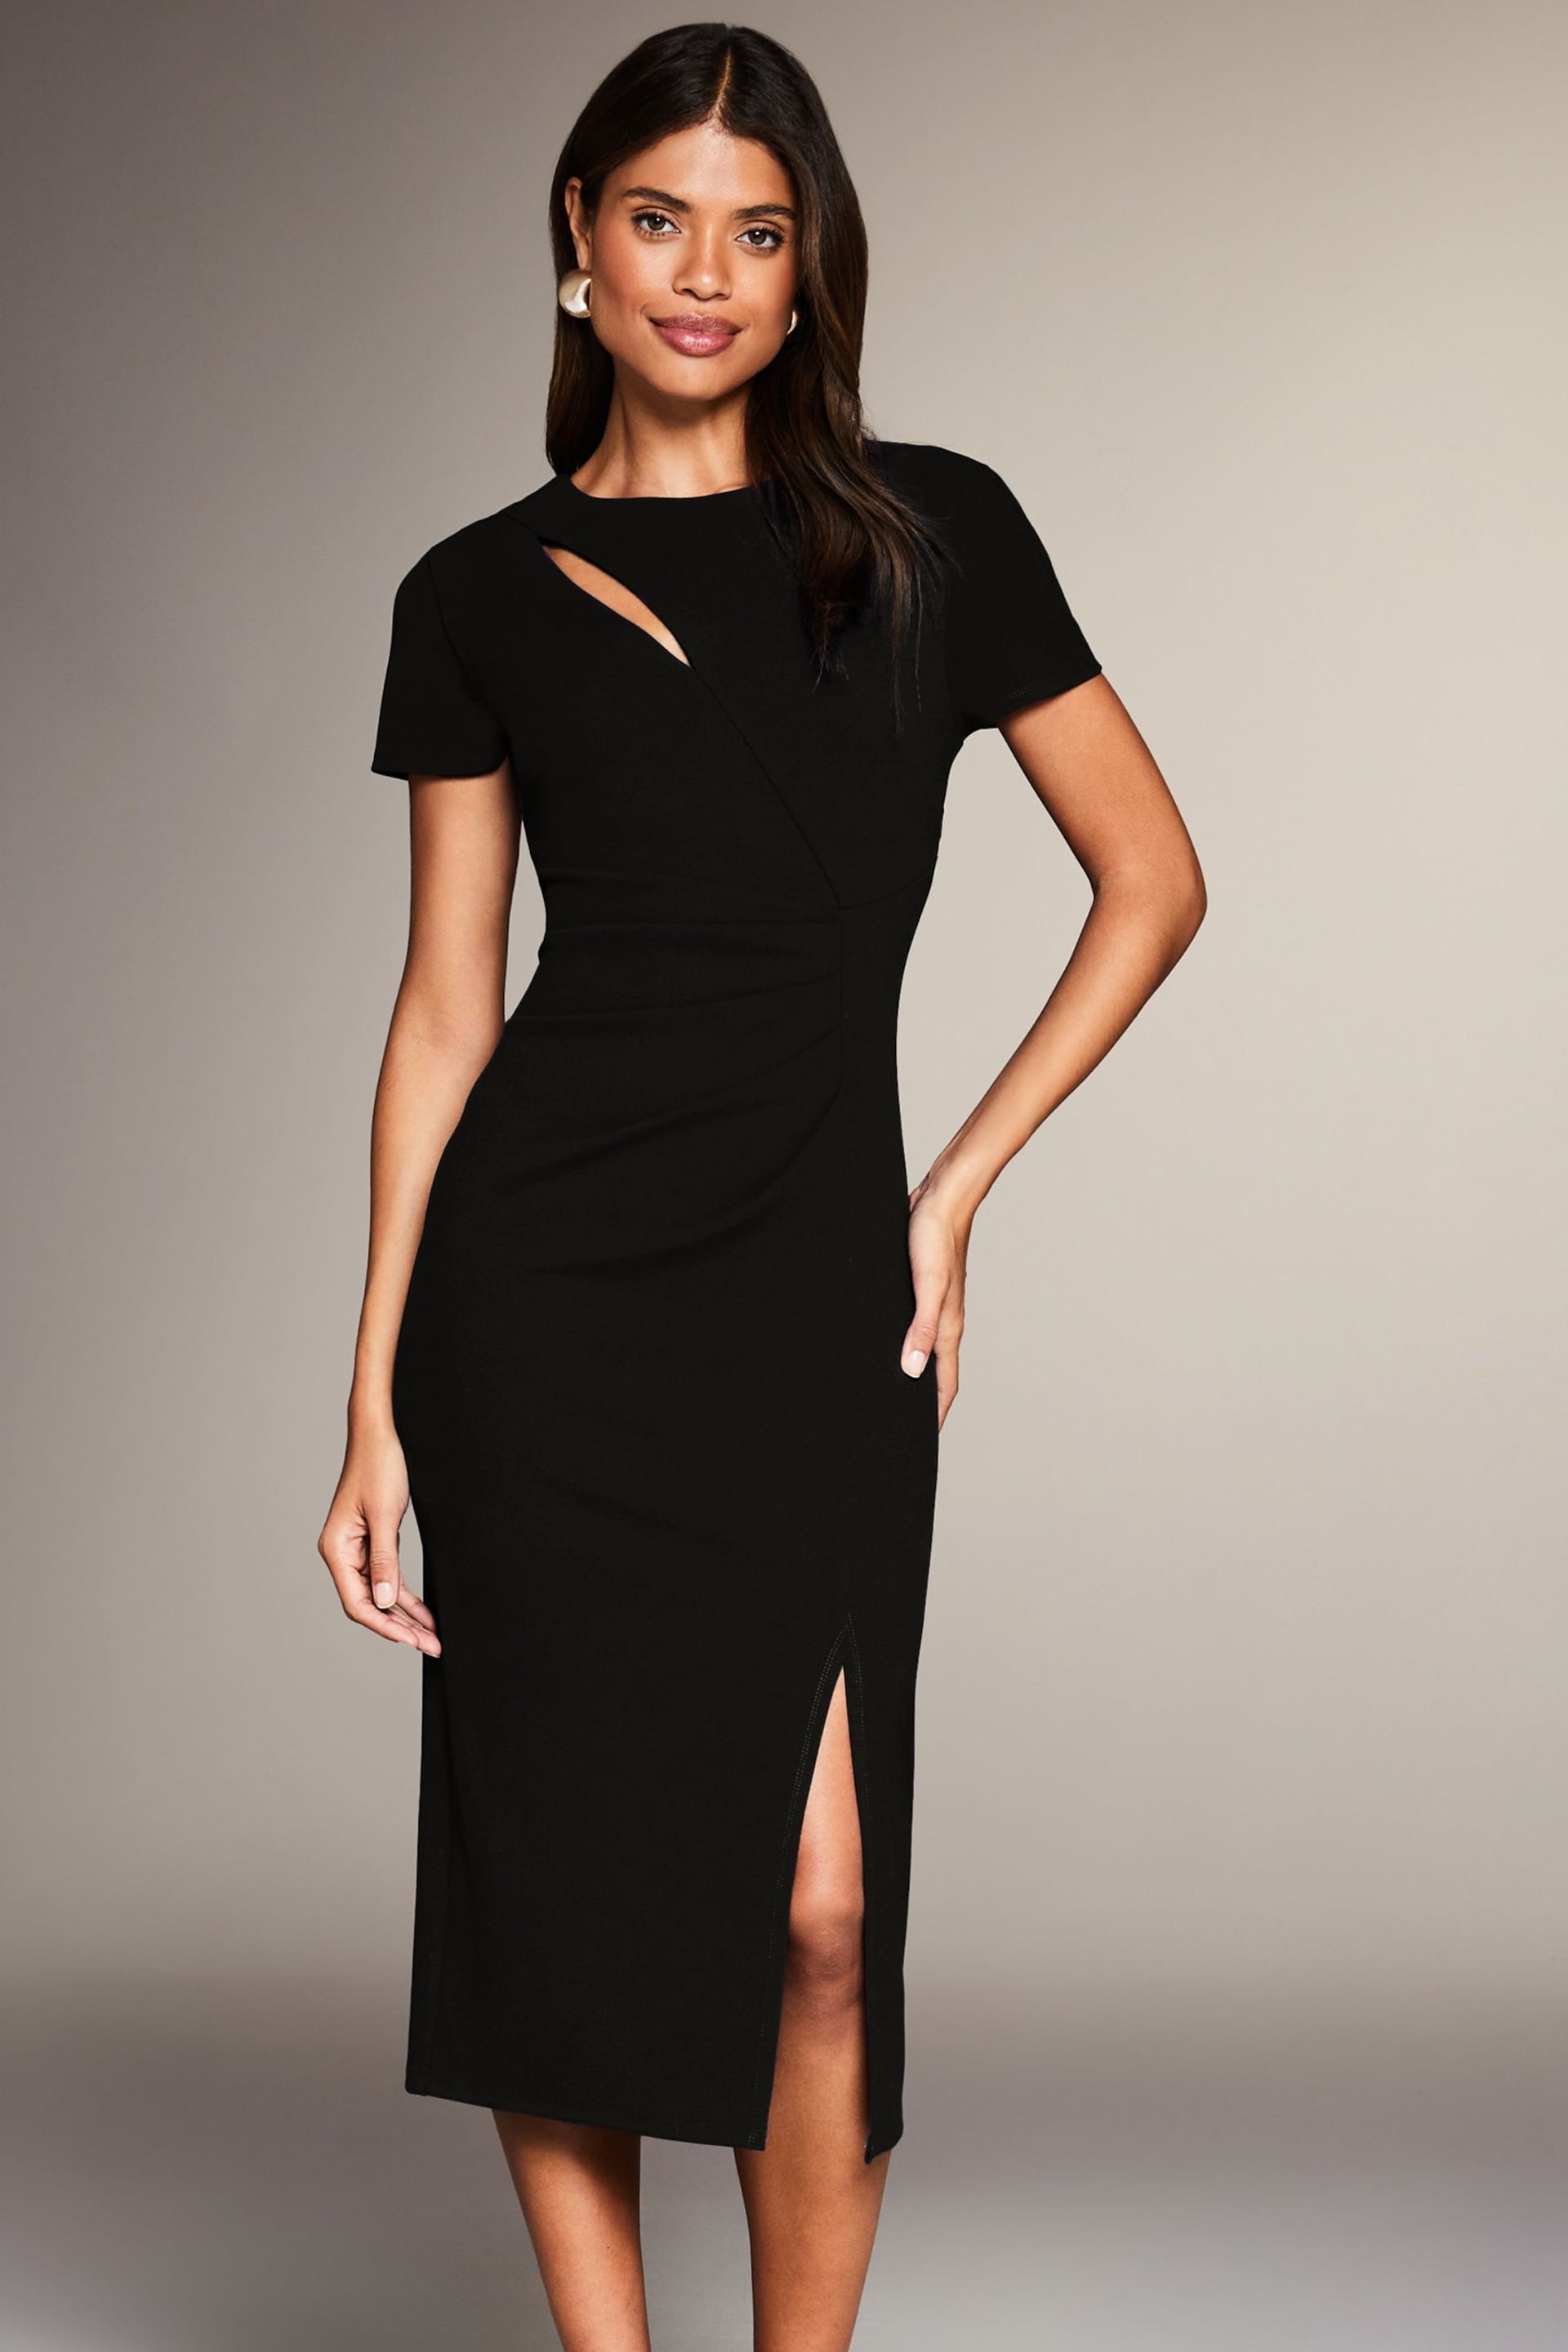 Lipsy Black Cut Out Ruched Shortss Sleeve Bodycon Dress - Image 3 of 4